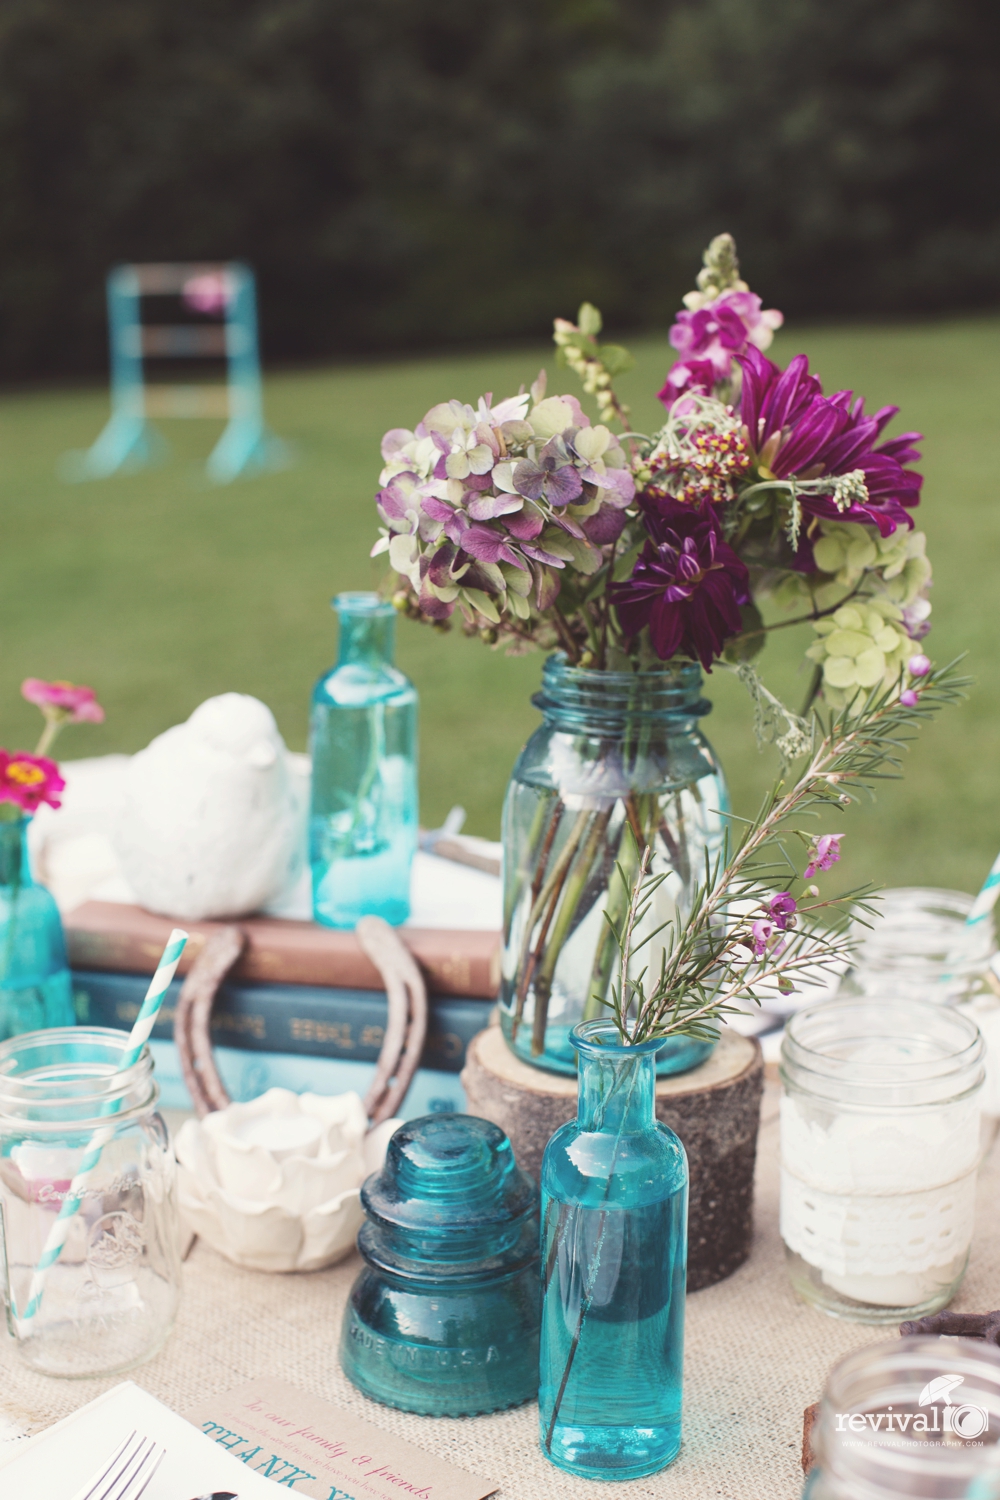 Old mason jars and vintage glassware as centerpieces for weddings